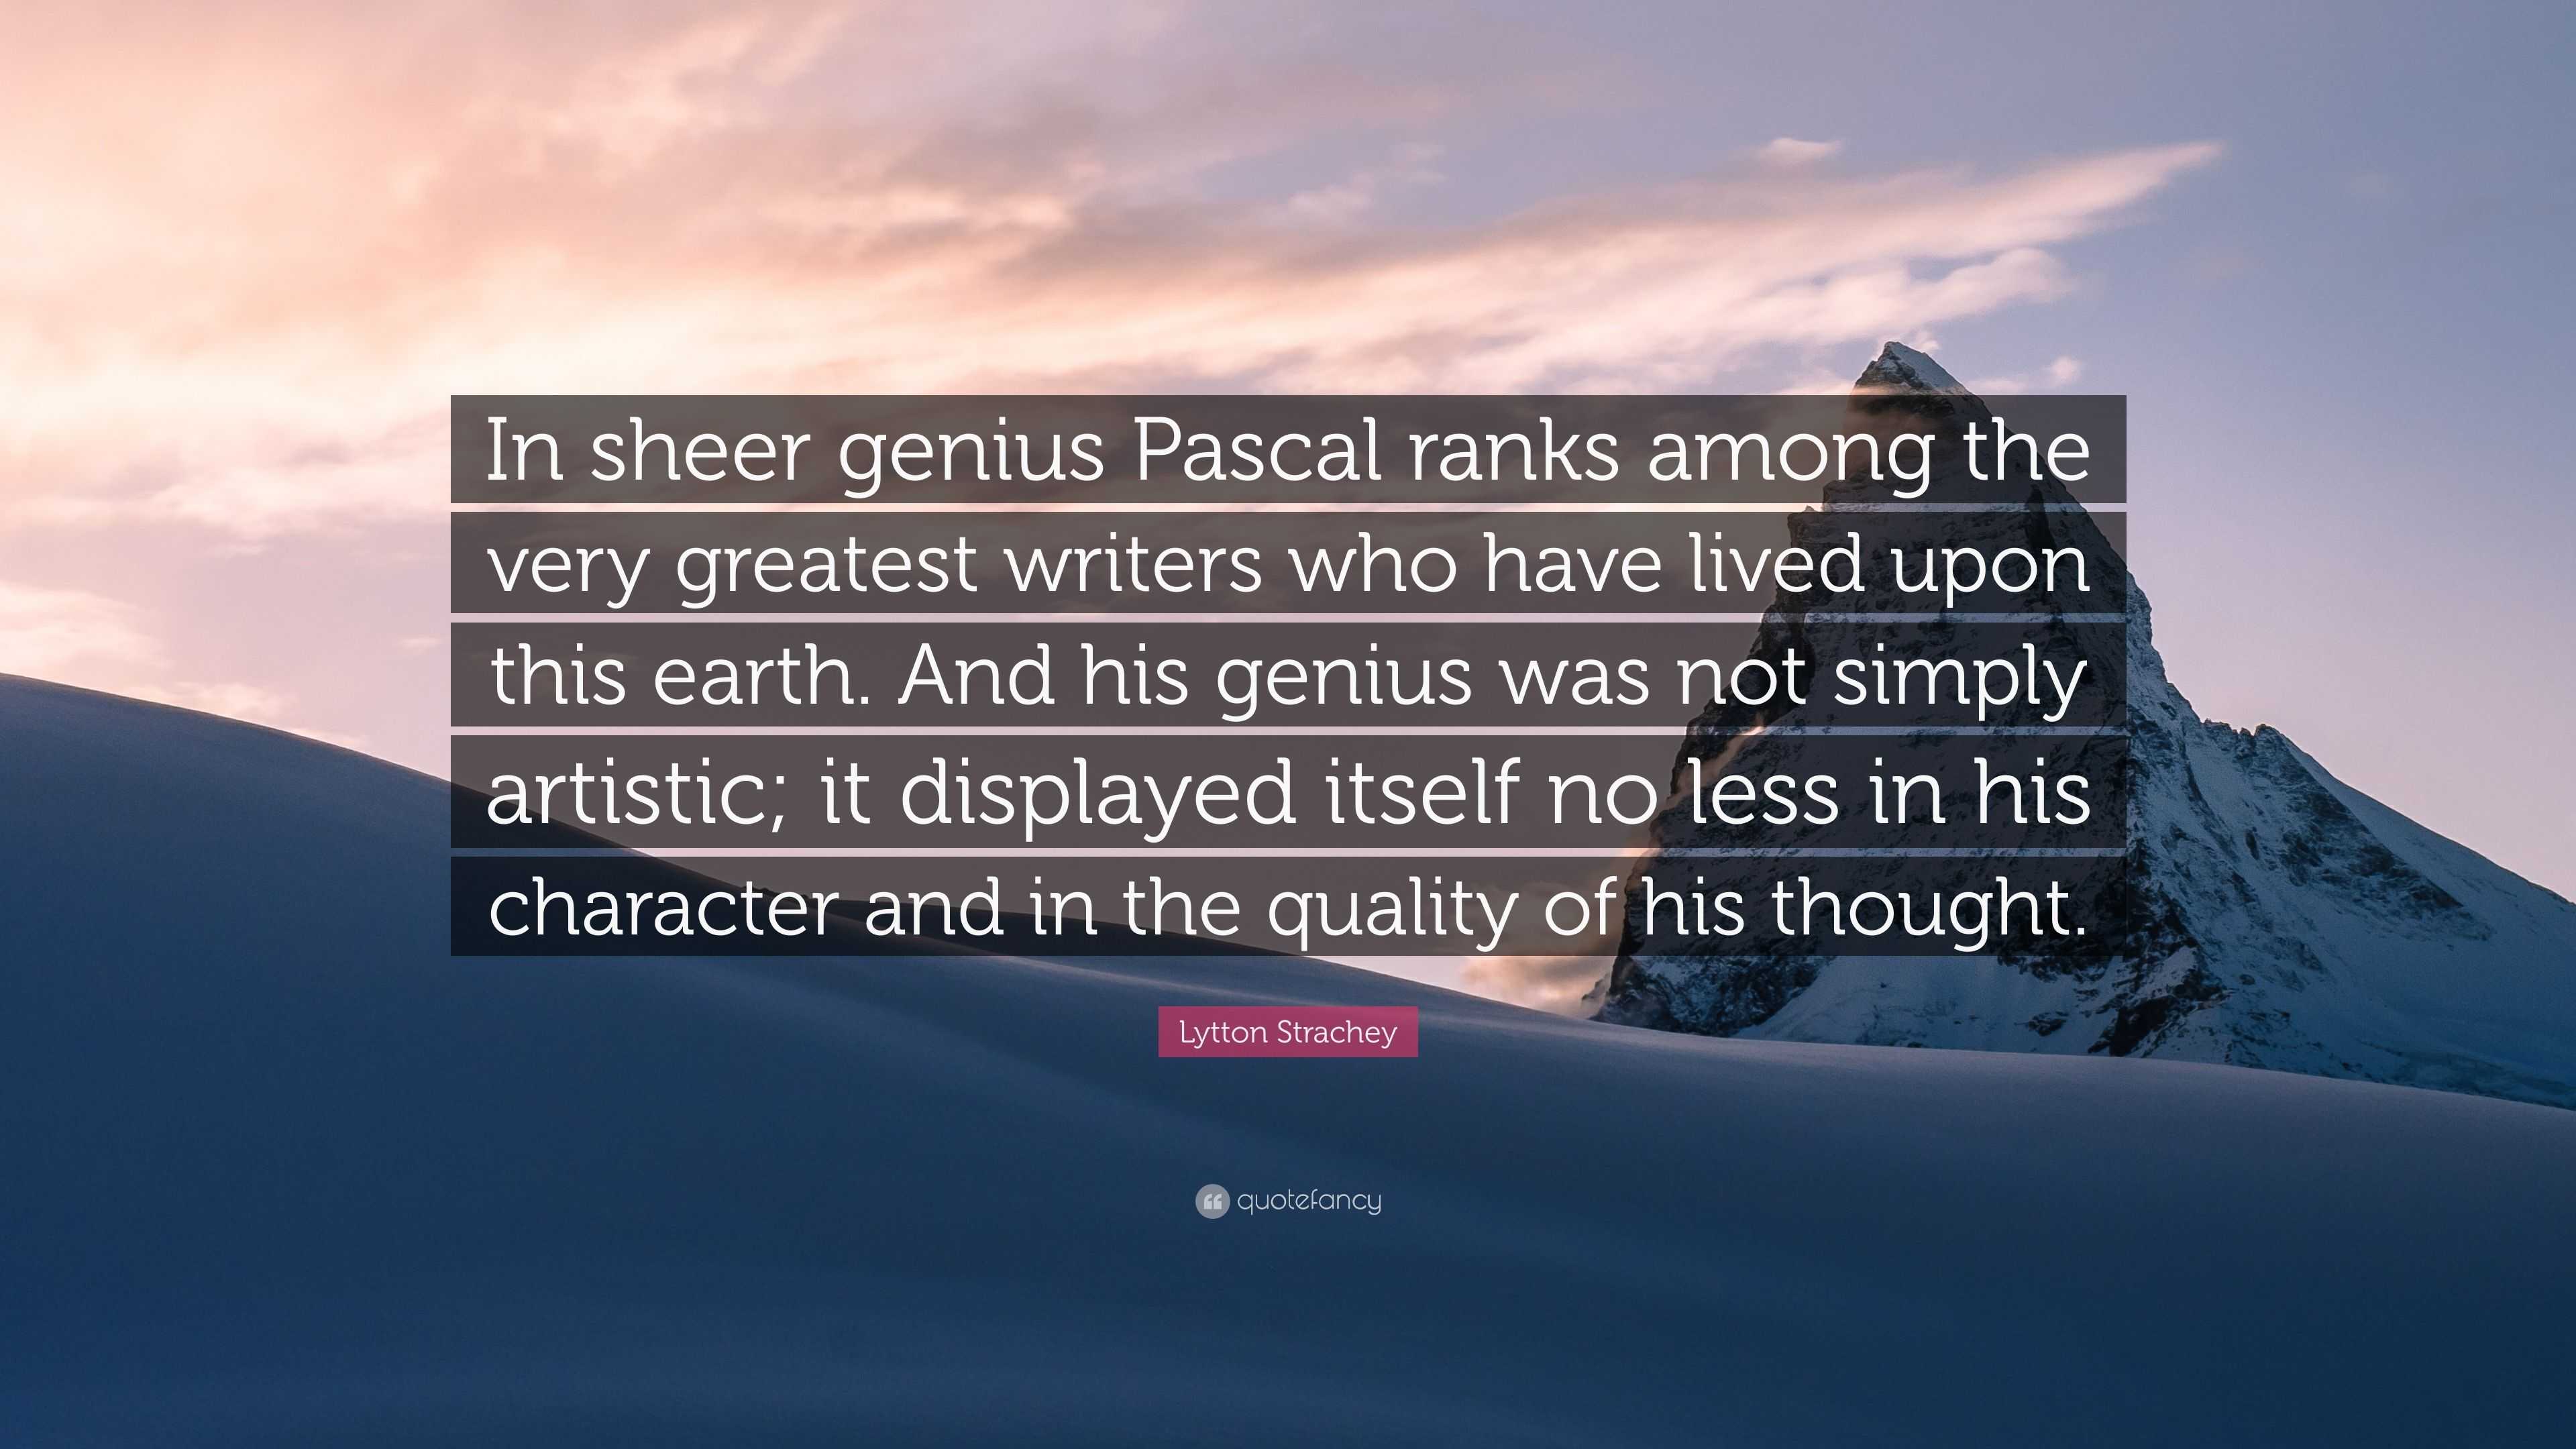 Lytton Strachey Quote: “In sheer genius Pascal ranks among the